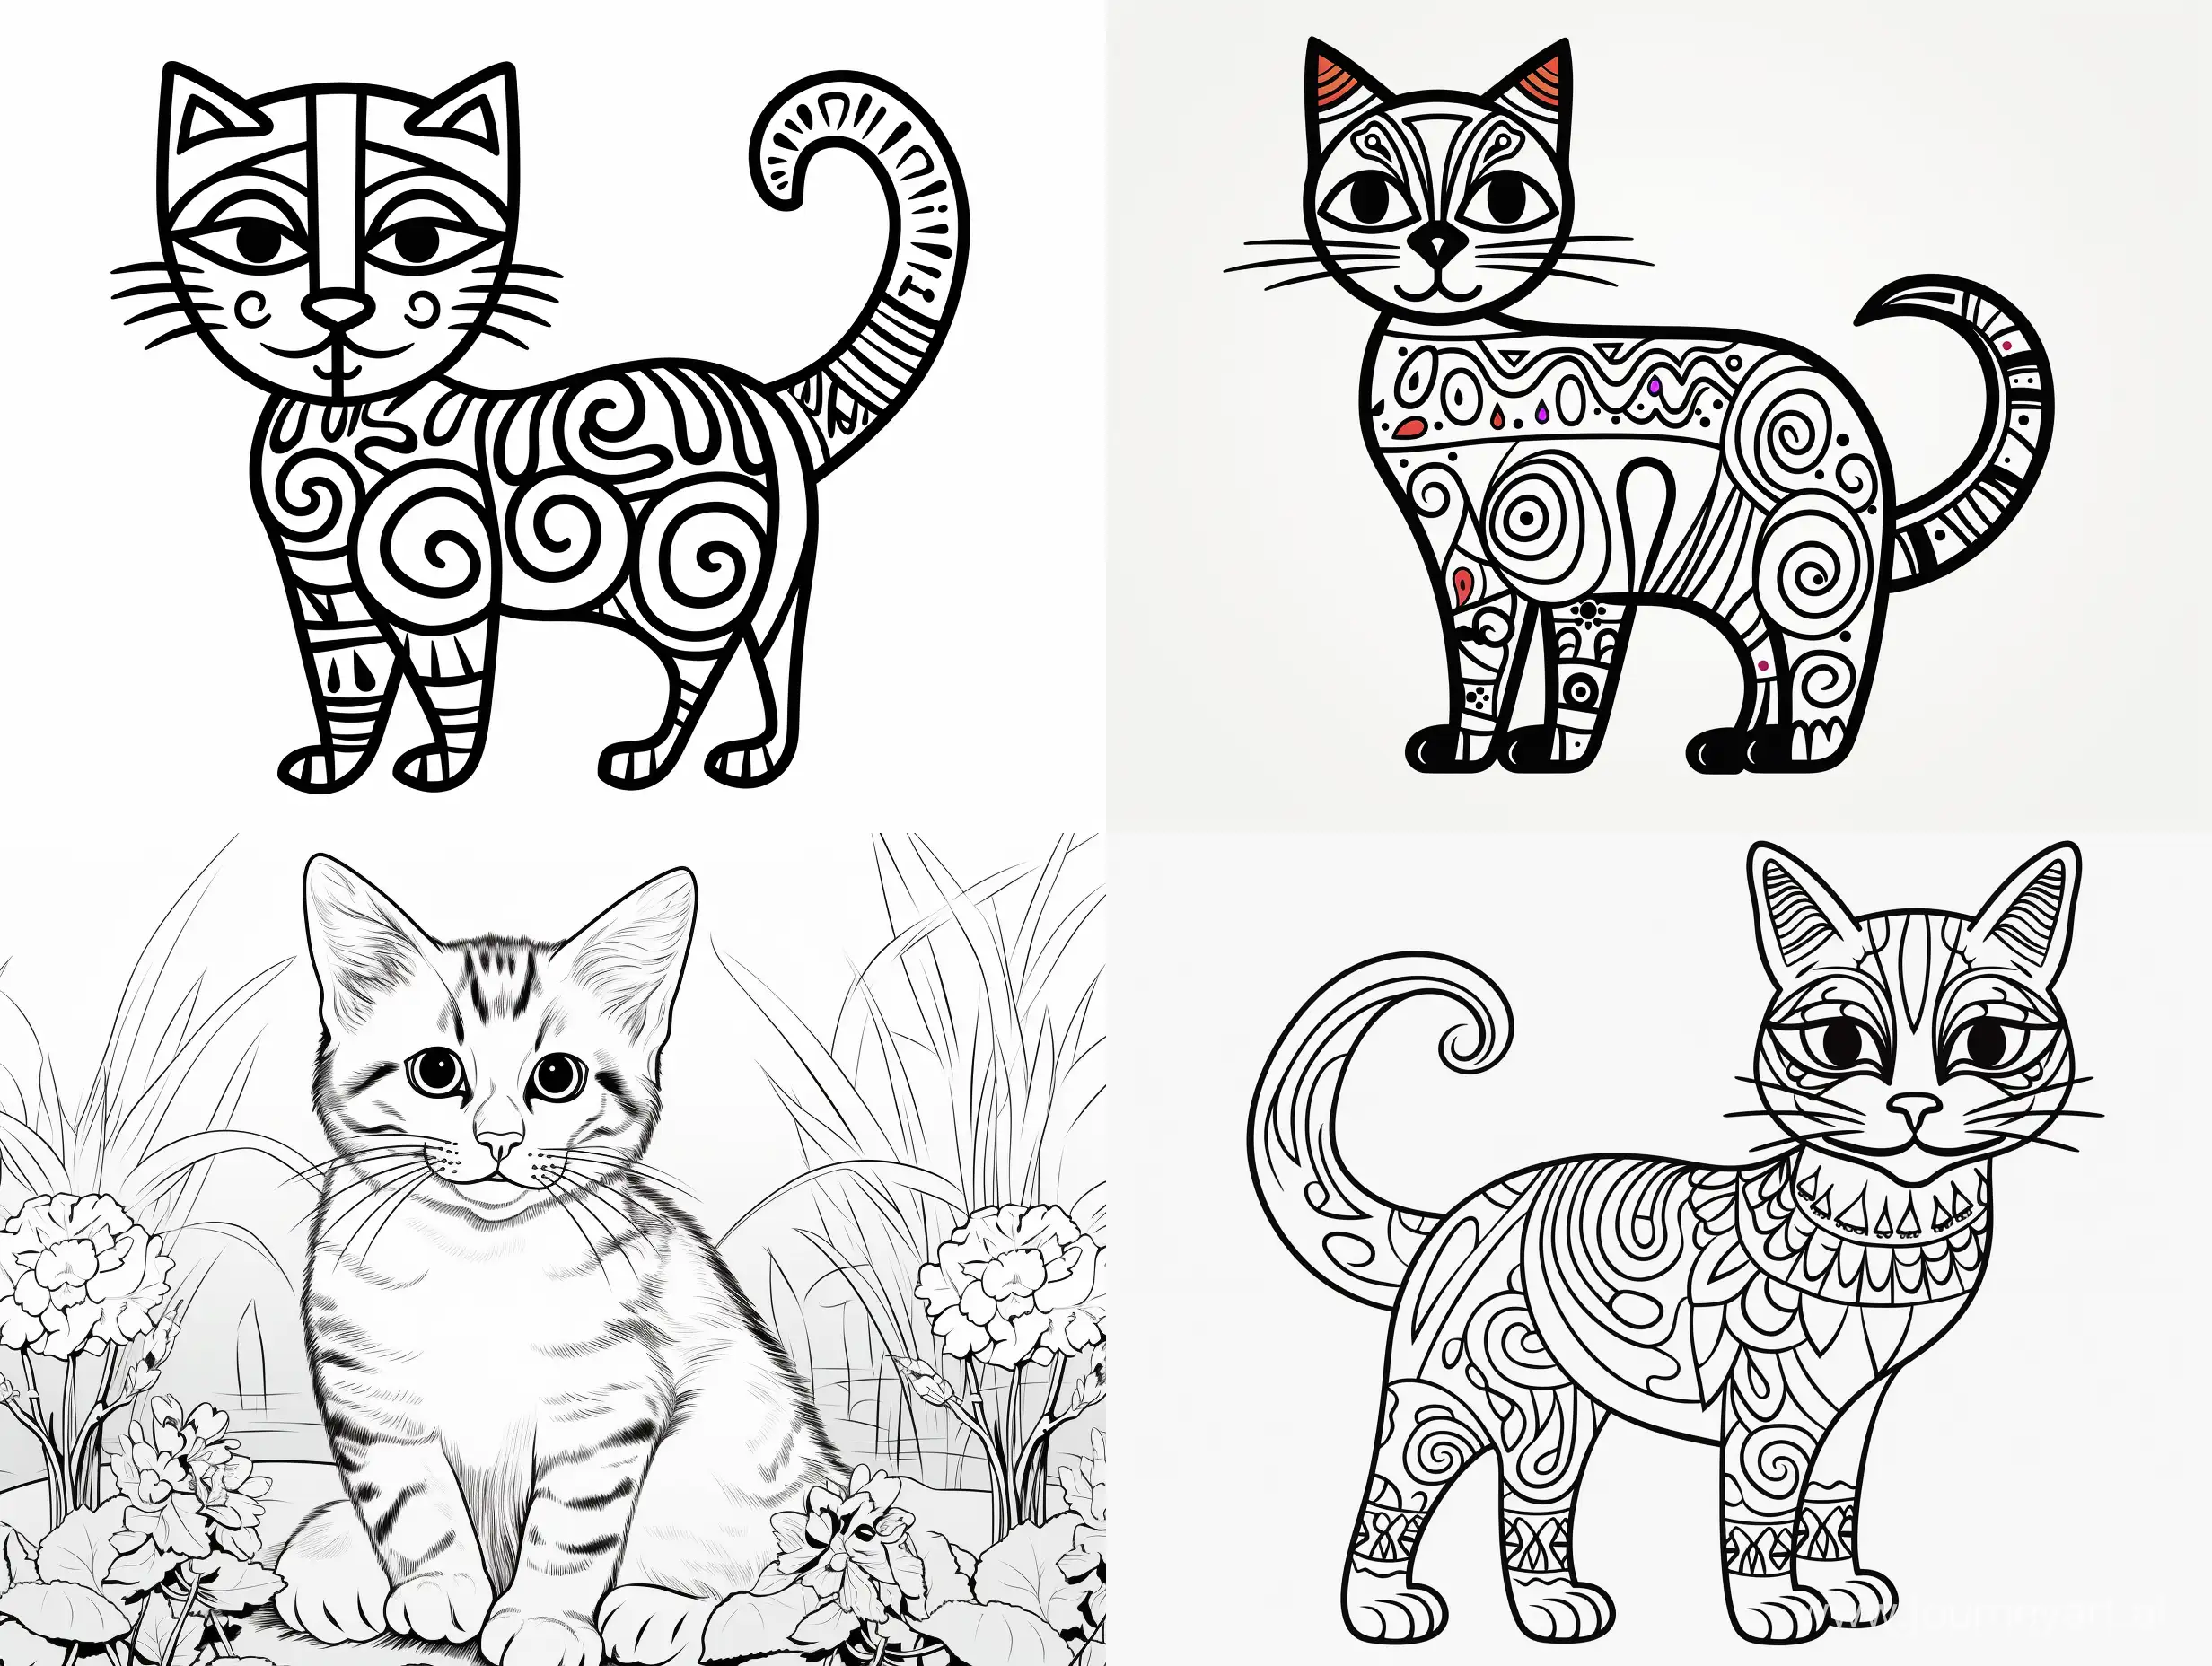 cat image, childrens colouring book, stencil, no background, fine lines, black and white, friendly cartoon, lines only, 50 image